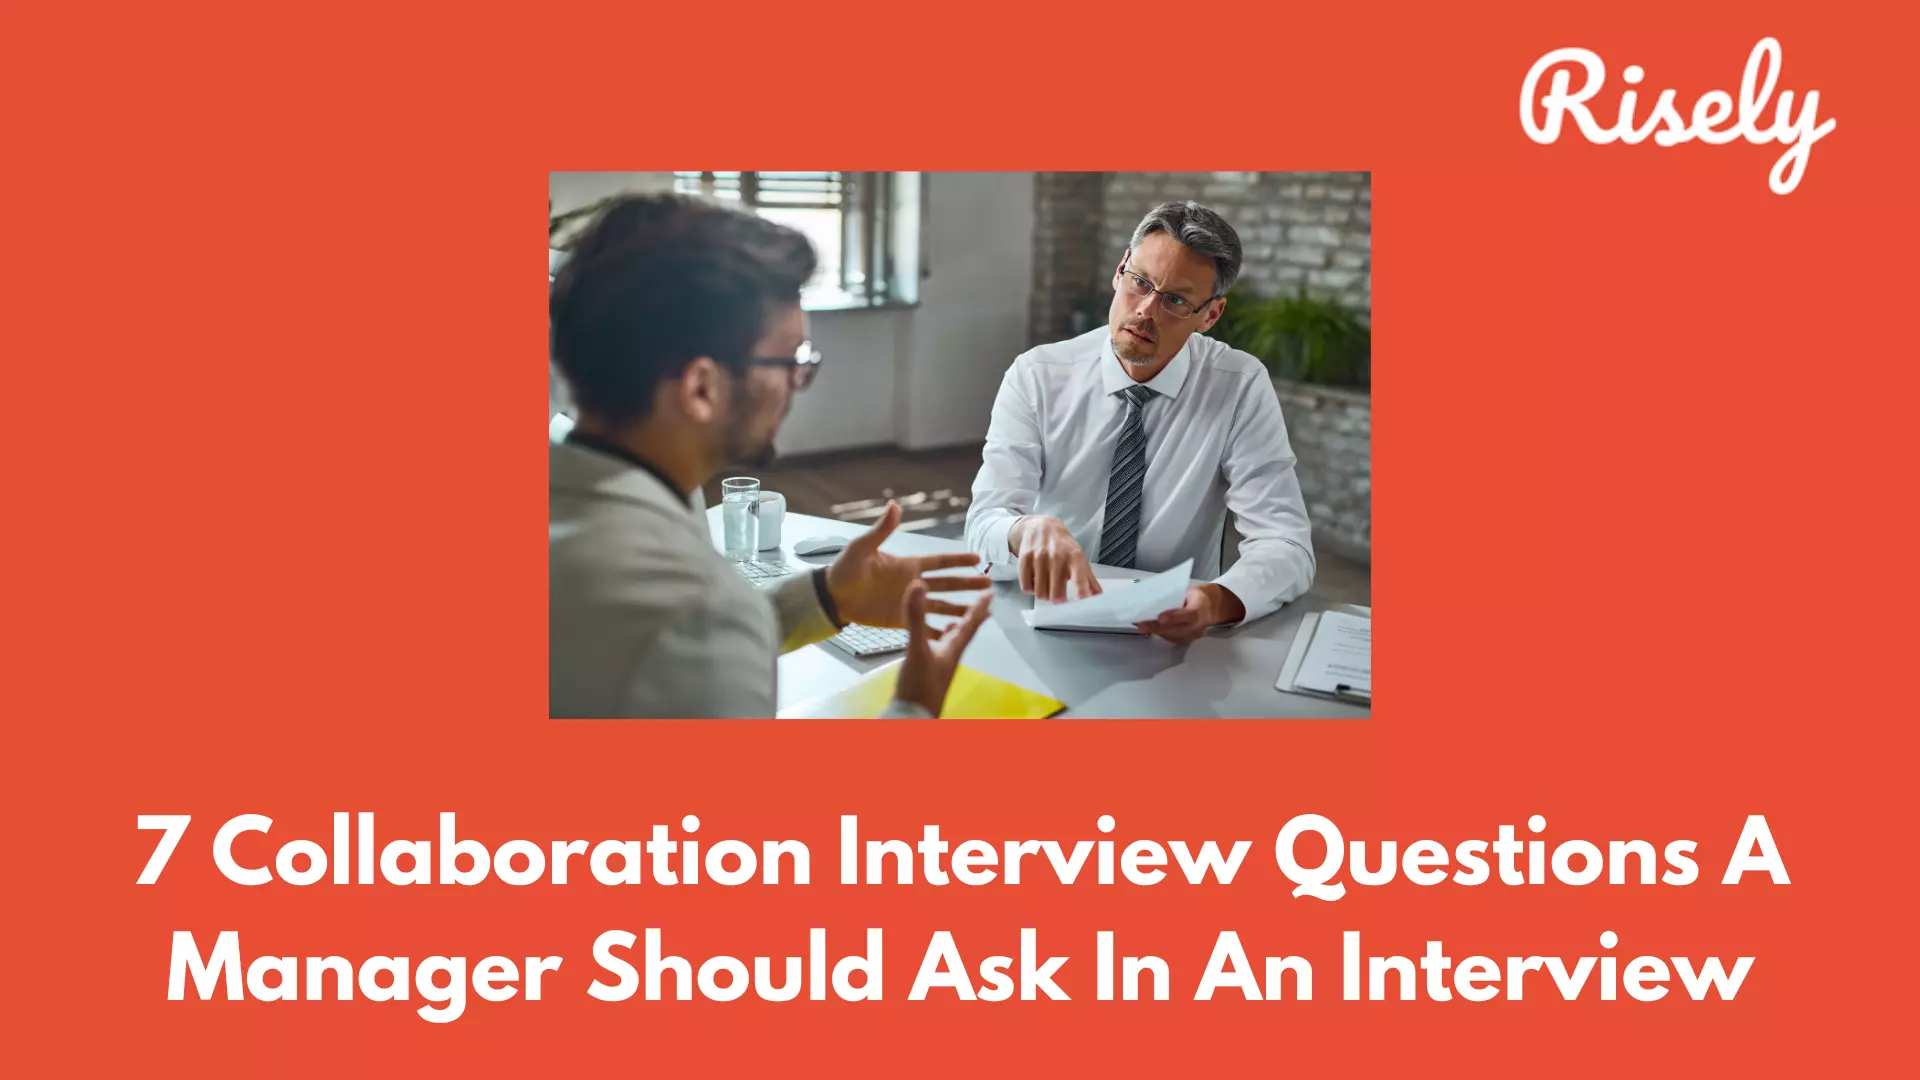 Collaboration interview questions